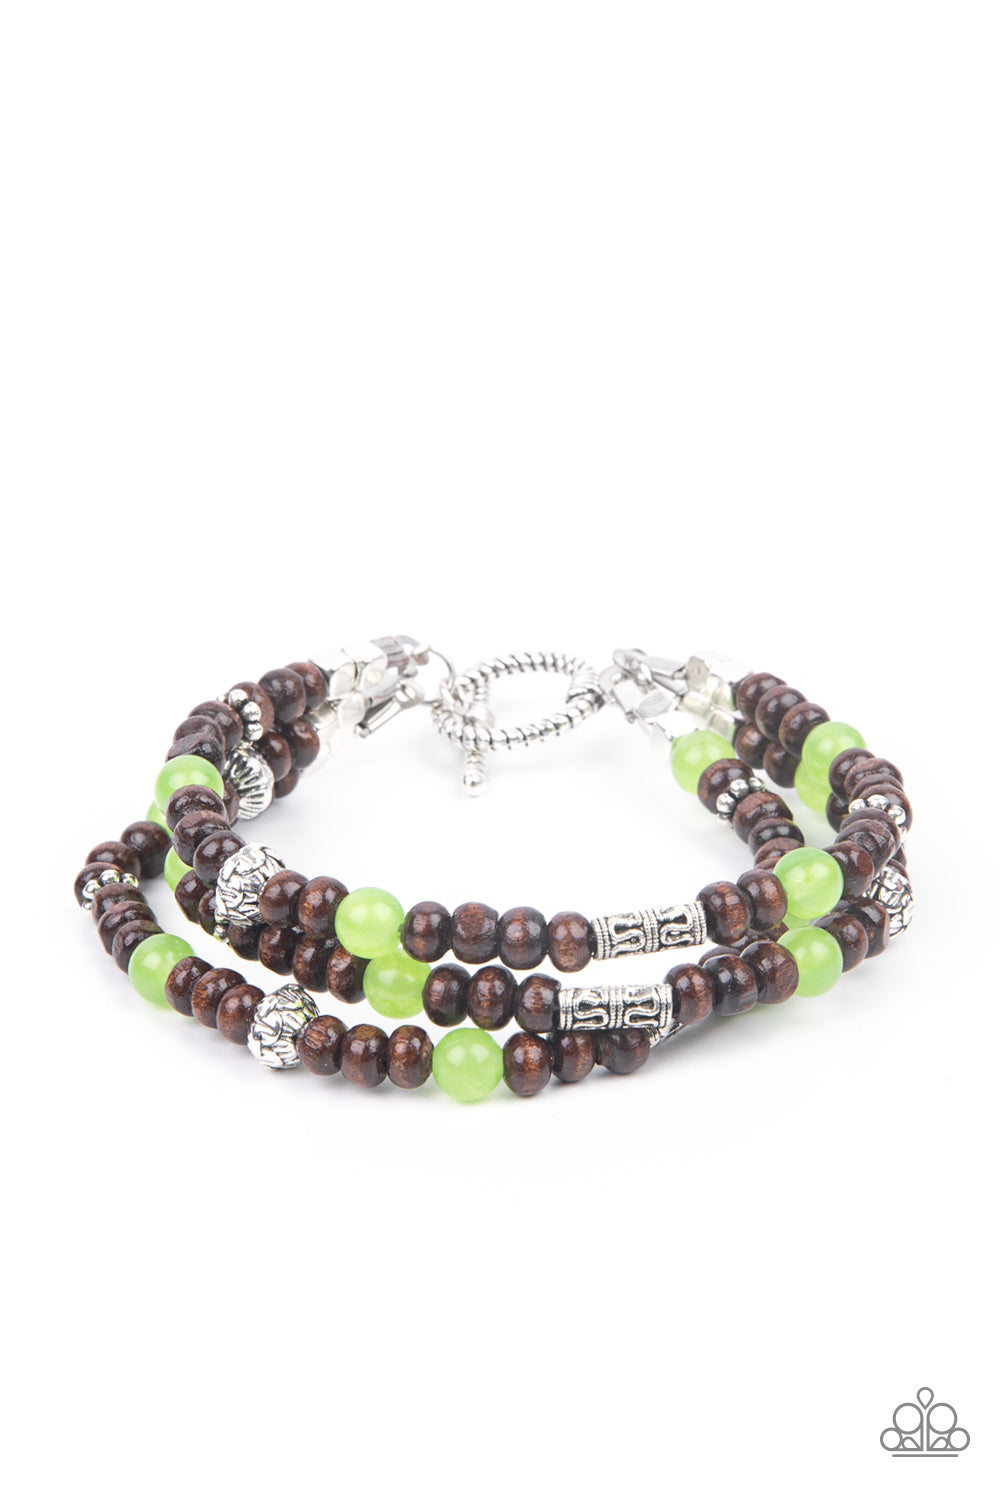 Woodsy Walkabout Green Toggle Bracelet - Paparazzi Accessories.  Apple Green stones and ornate silver beads provide a refreshing accent to triple strands of wooden beads as they layer around the wrist in an air of earthy sophistication. Features a toggle clasp closure.  ﻿﻿﻿All Paparazzi Accessories are lead free and nickel free!  Sold as one individual bracelet.